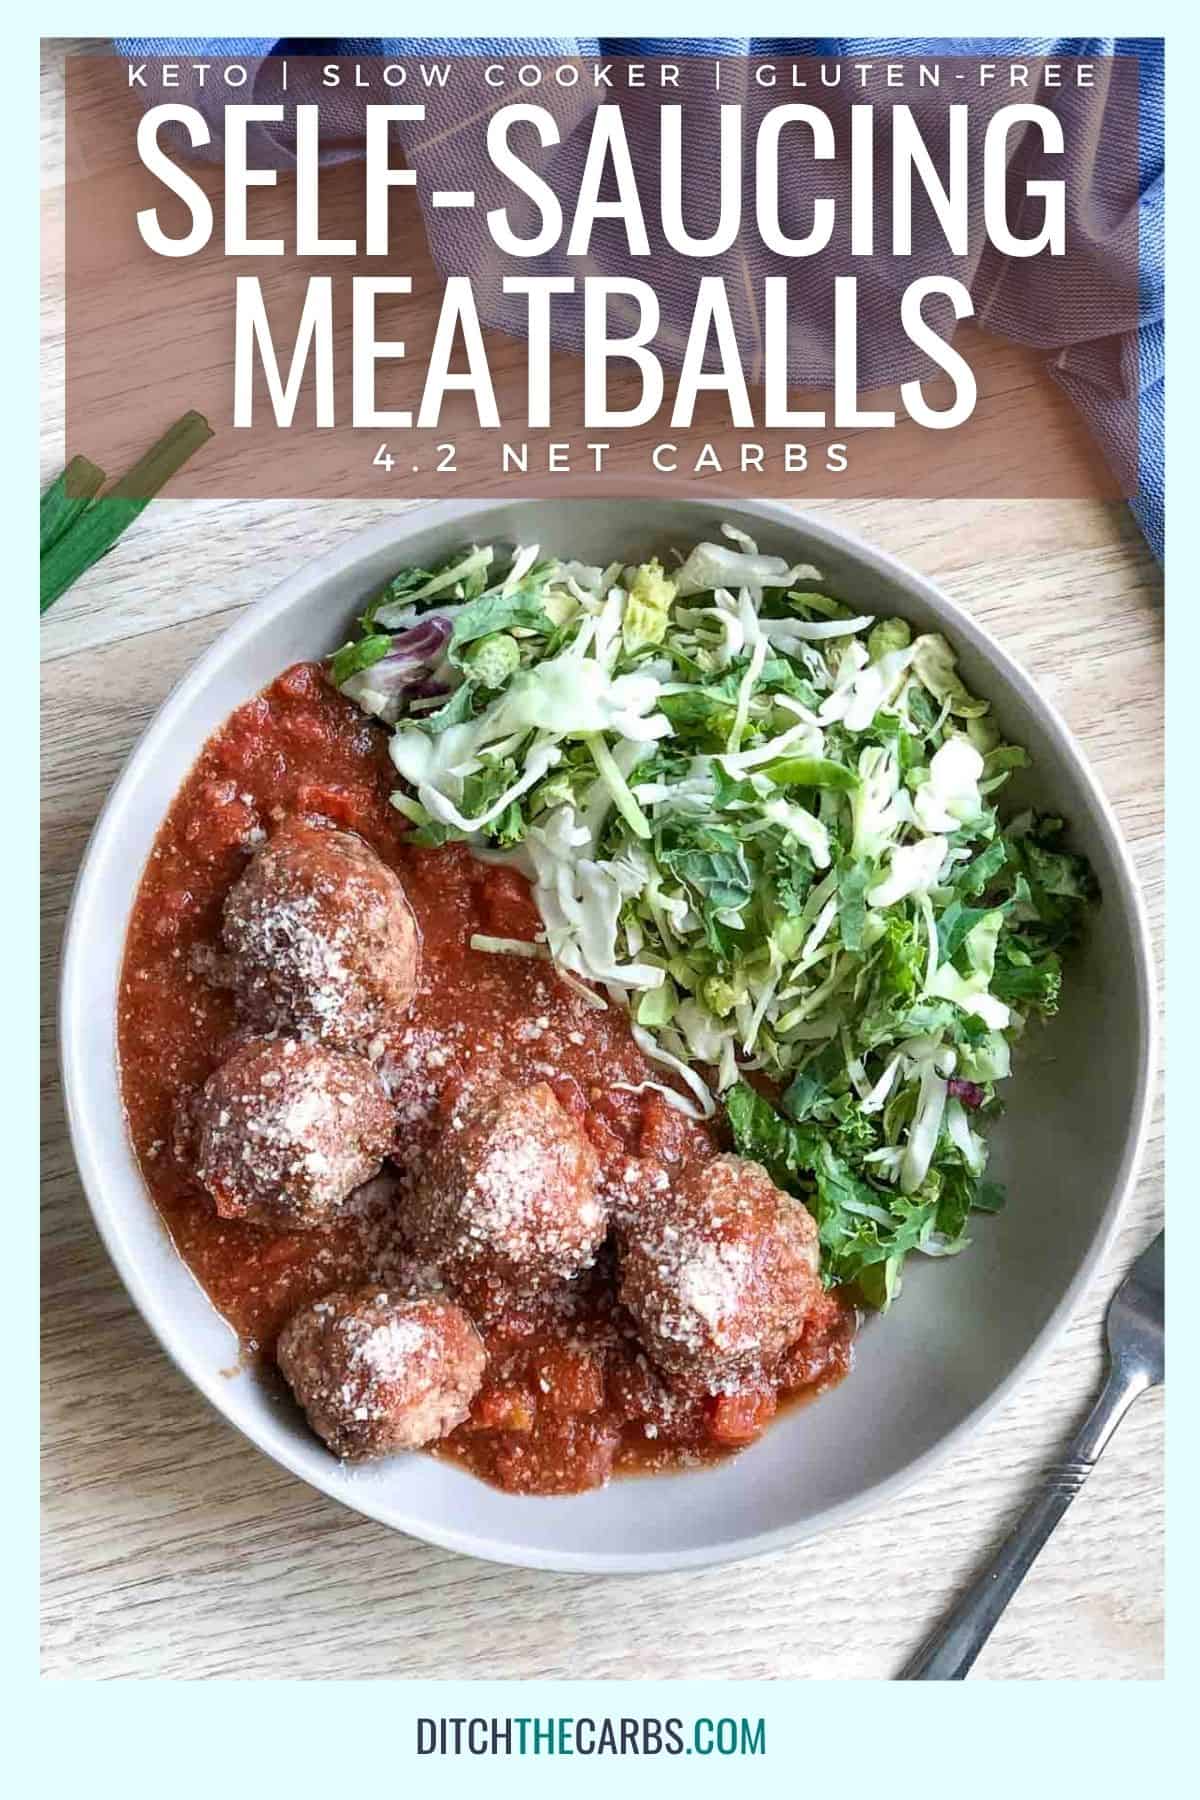 keto self-saucing meatballs served in a bowl with sliced cabbage